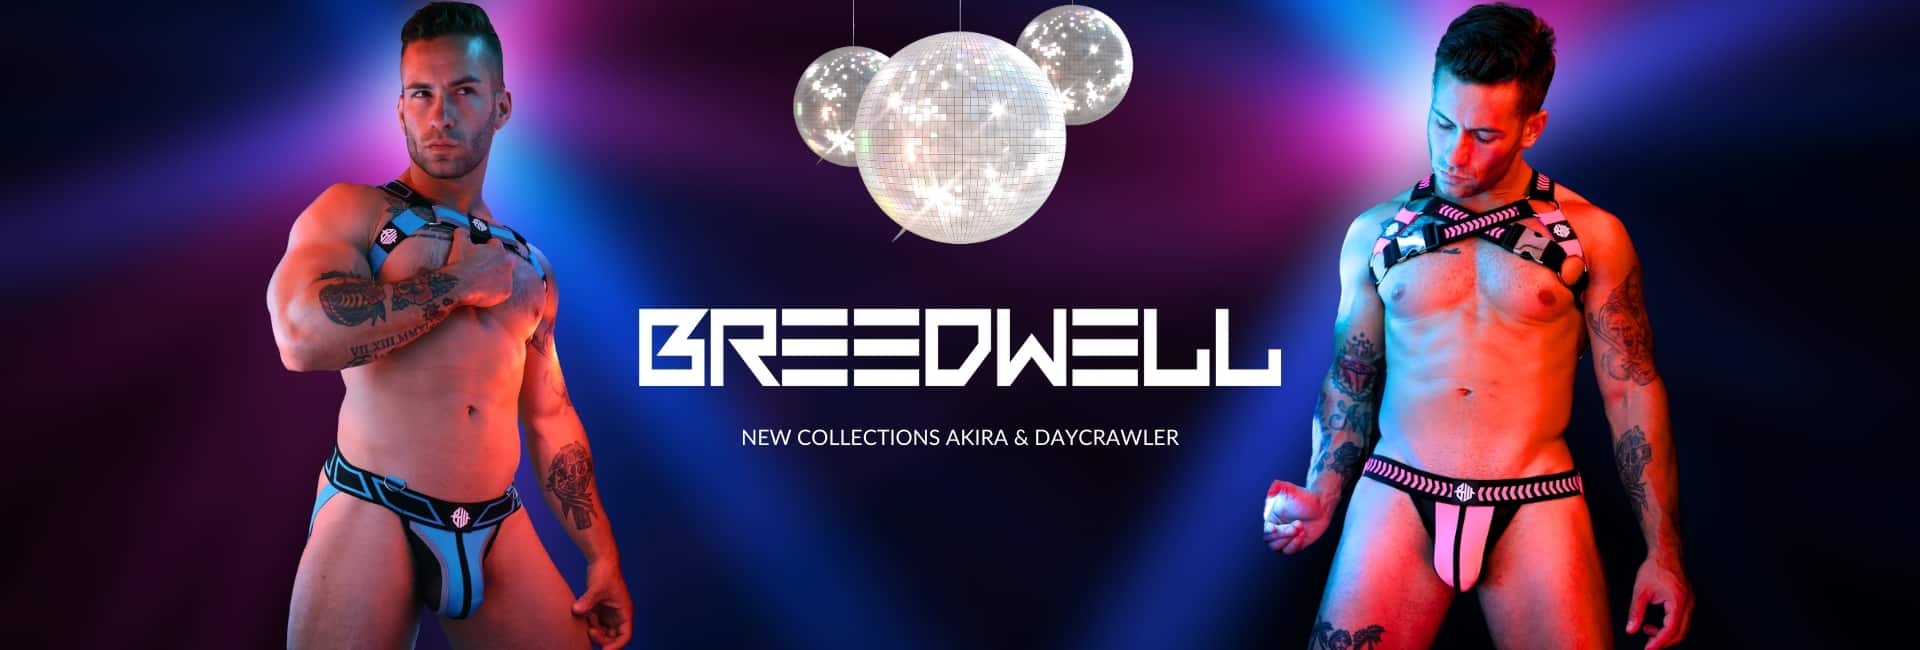 BREEDWELL BRAND PAGE AT VOCLA